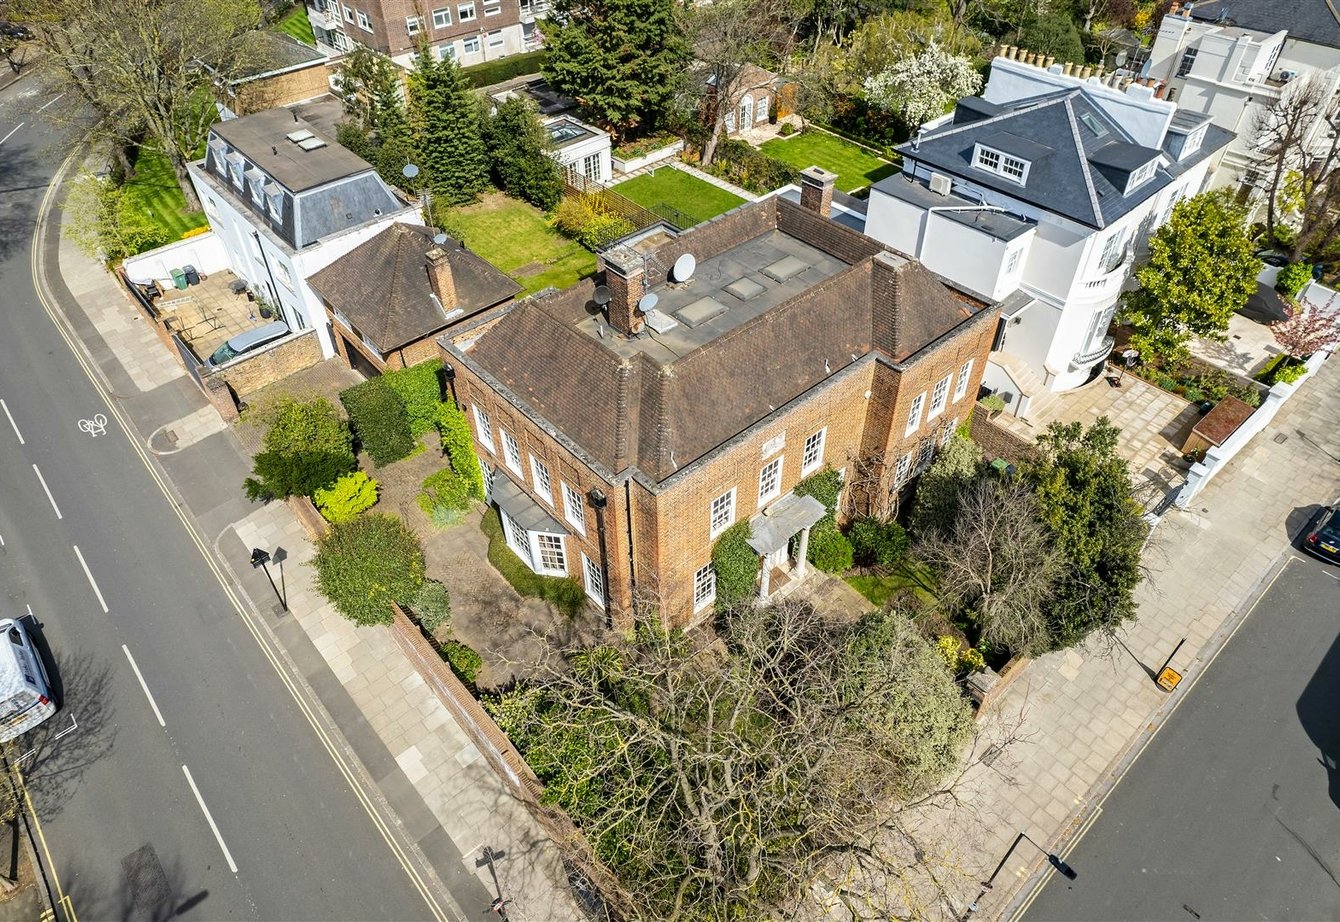 for-sale-queens-grove-london-351-view7